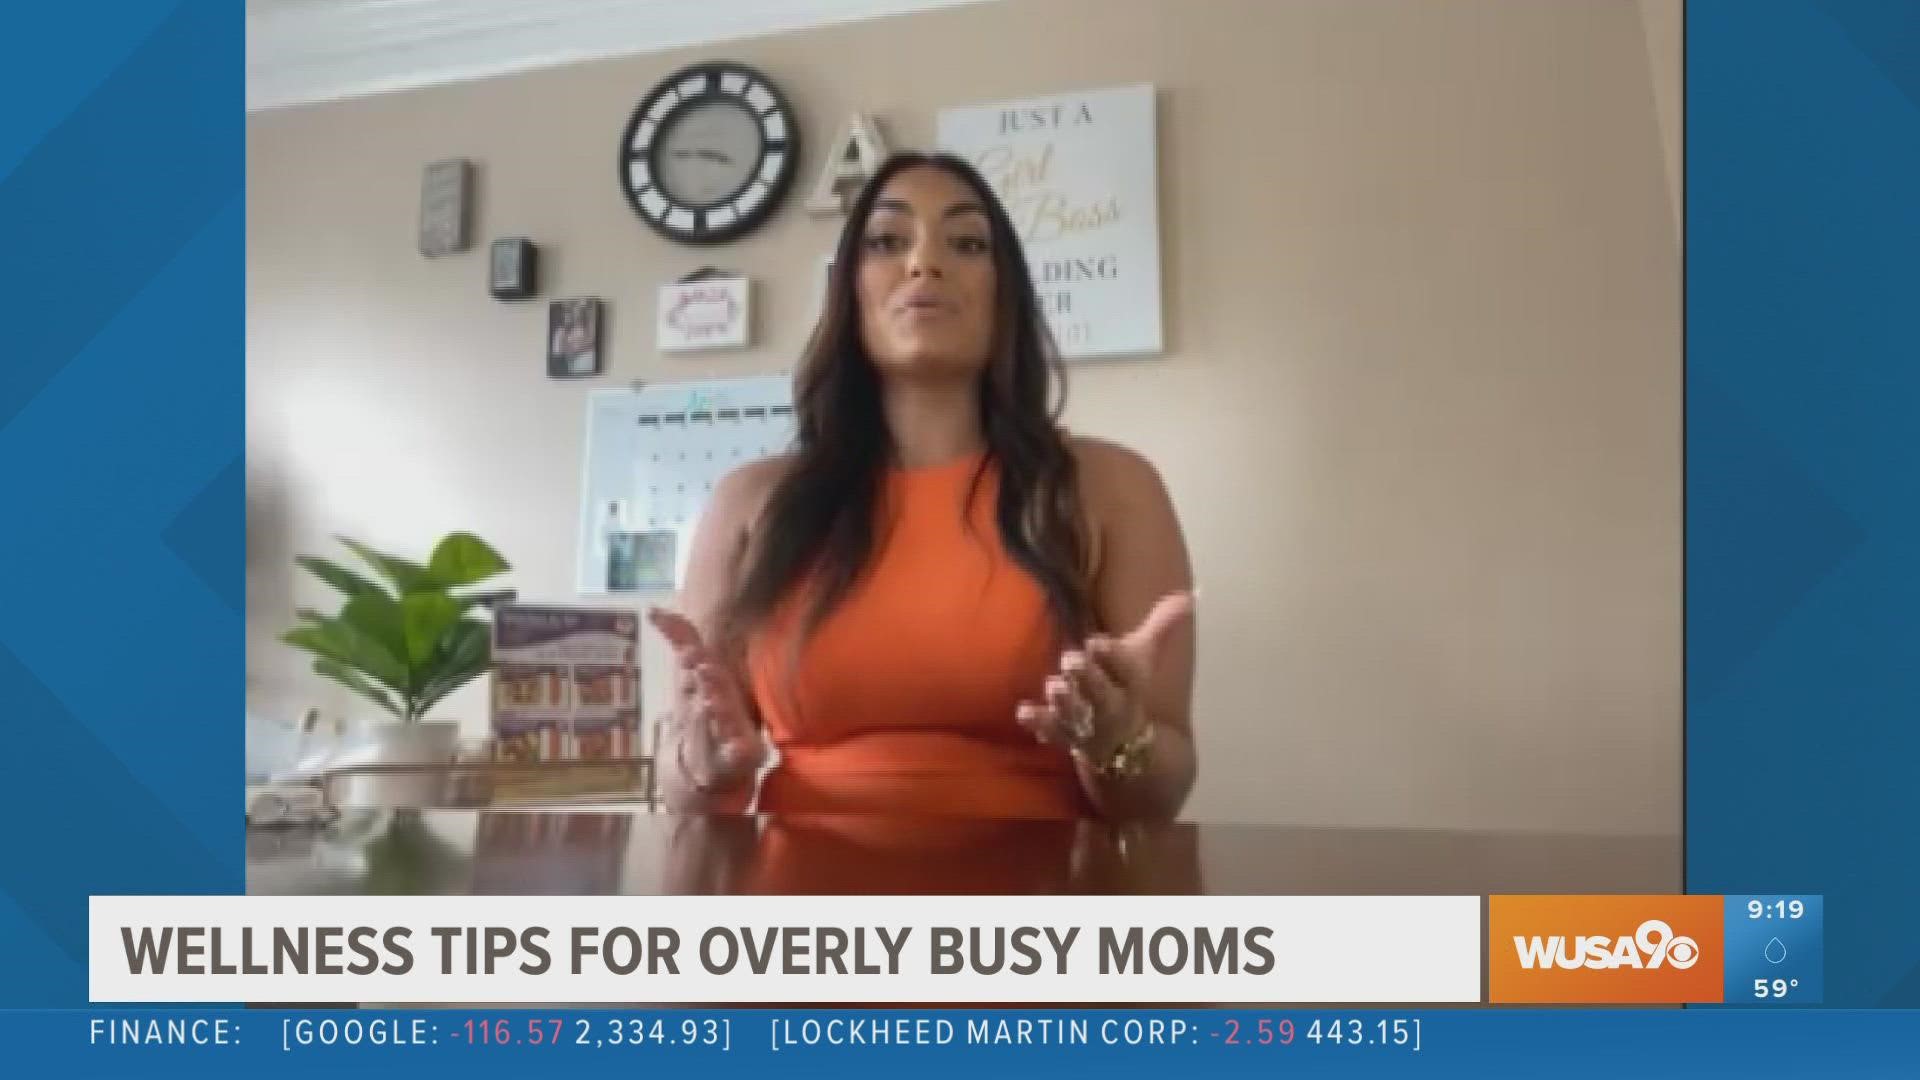 Ellen talks to Annarose Fit & Healthy Founder & CEO Annarose Mongiello-Ciminera who encourages moms to set aside time for self-care work.